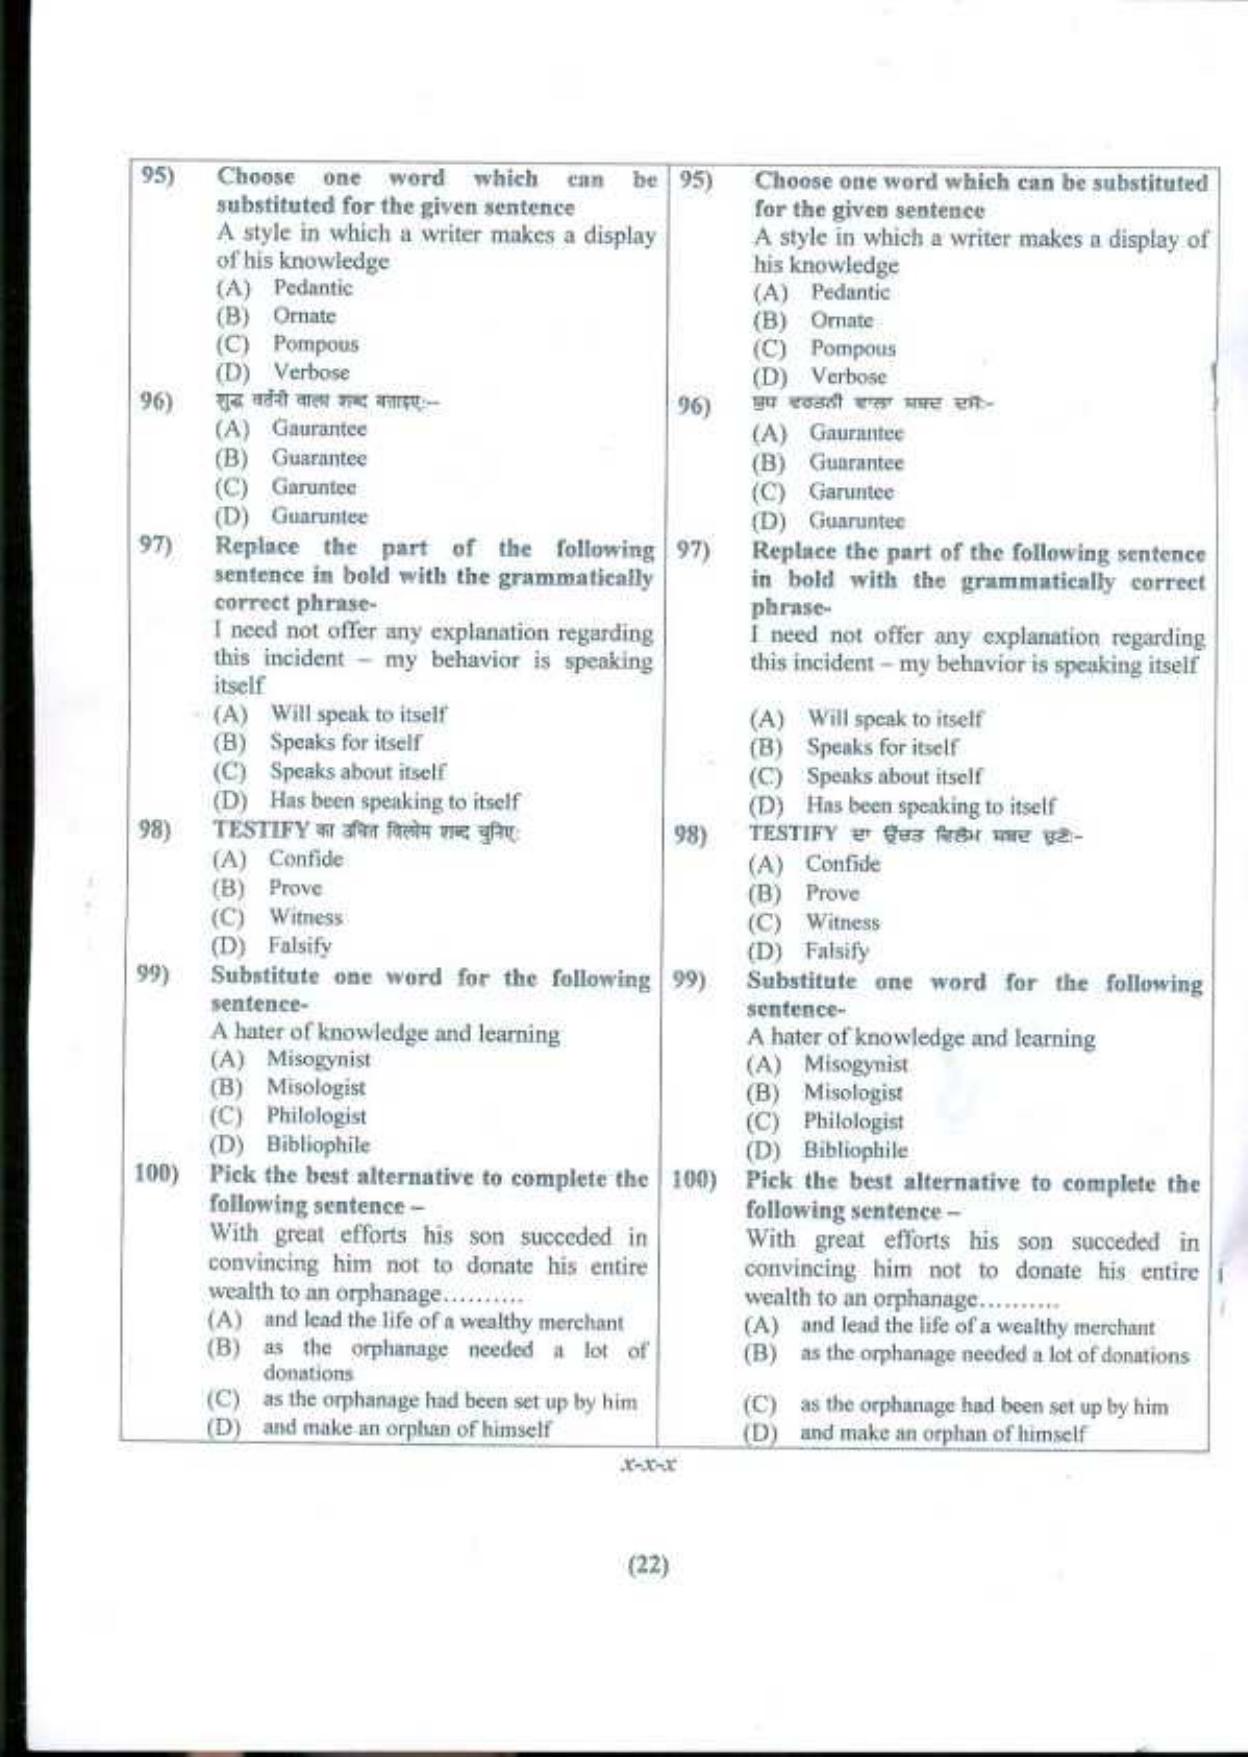 PU LLB 2019 Question Paper - Page 23